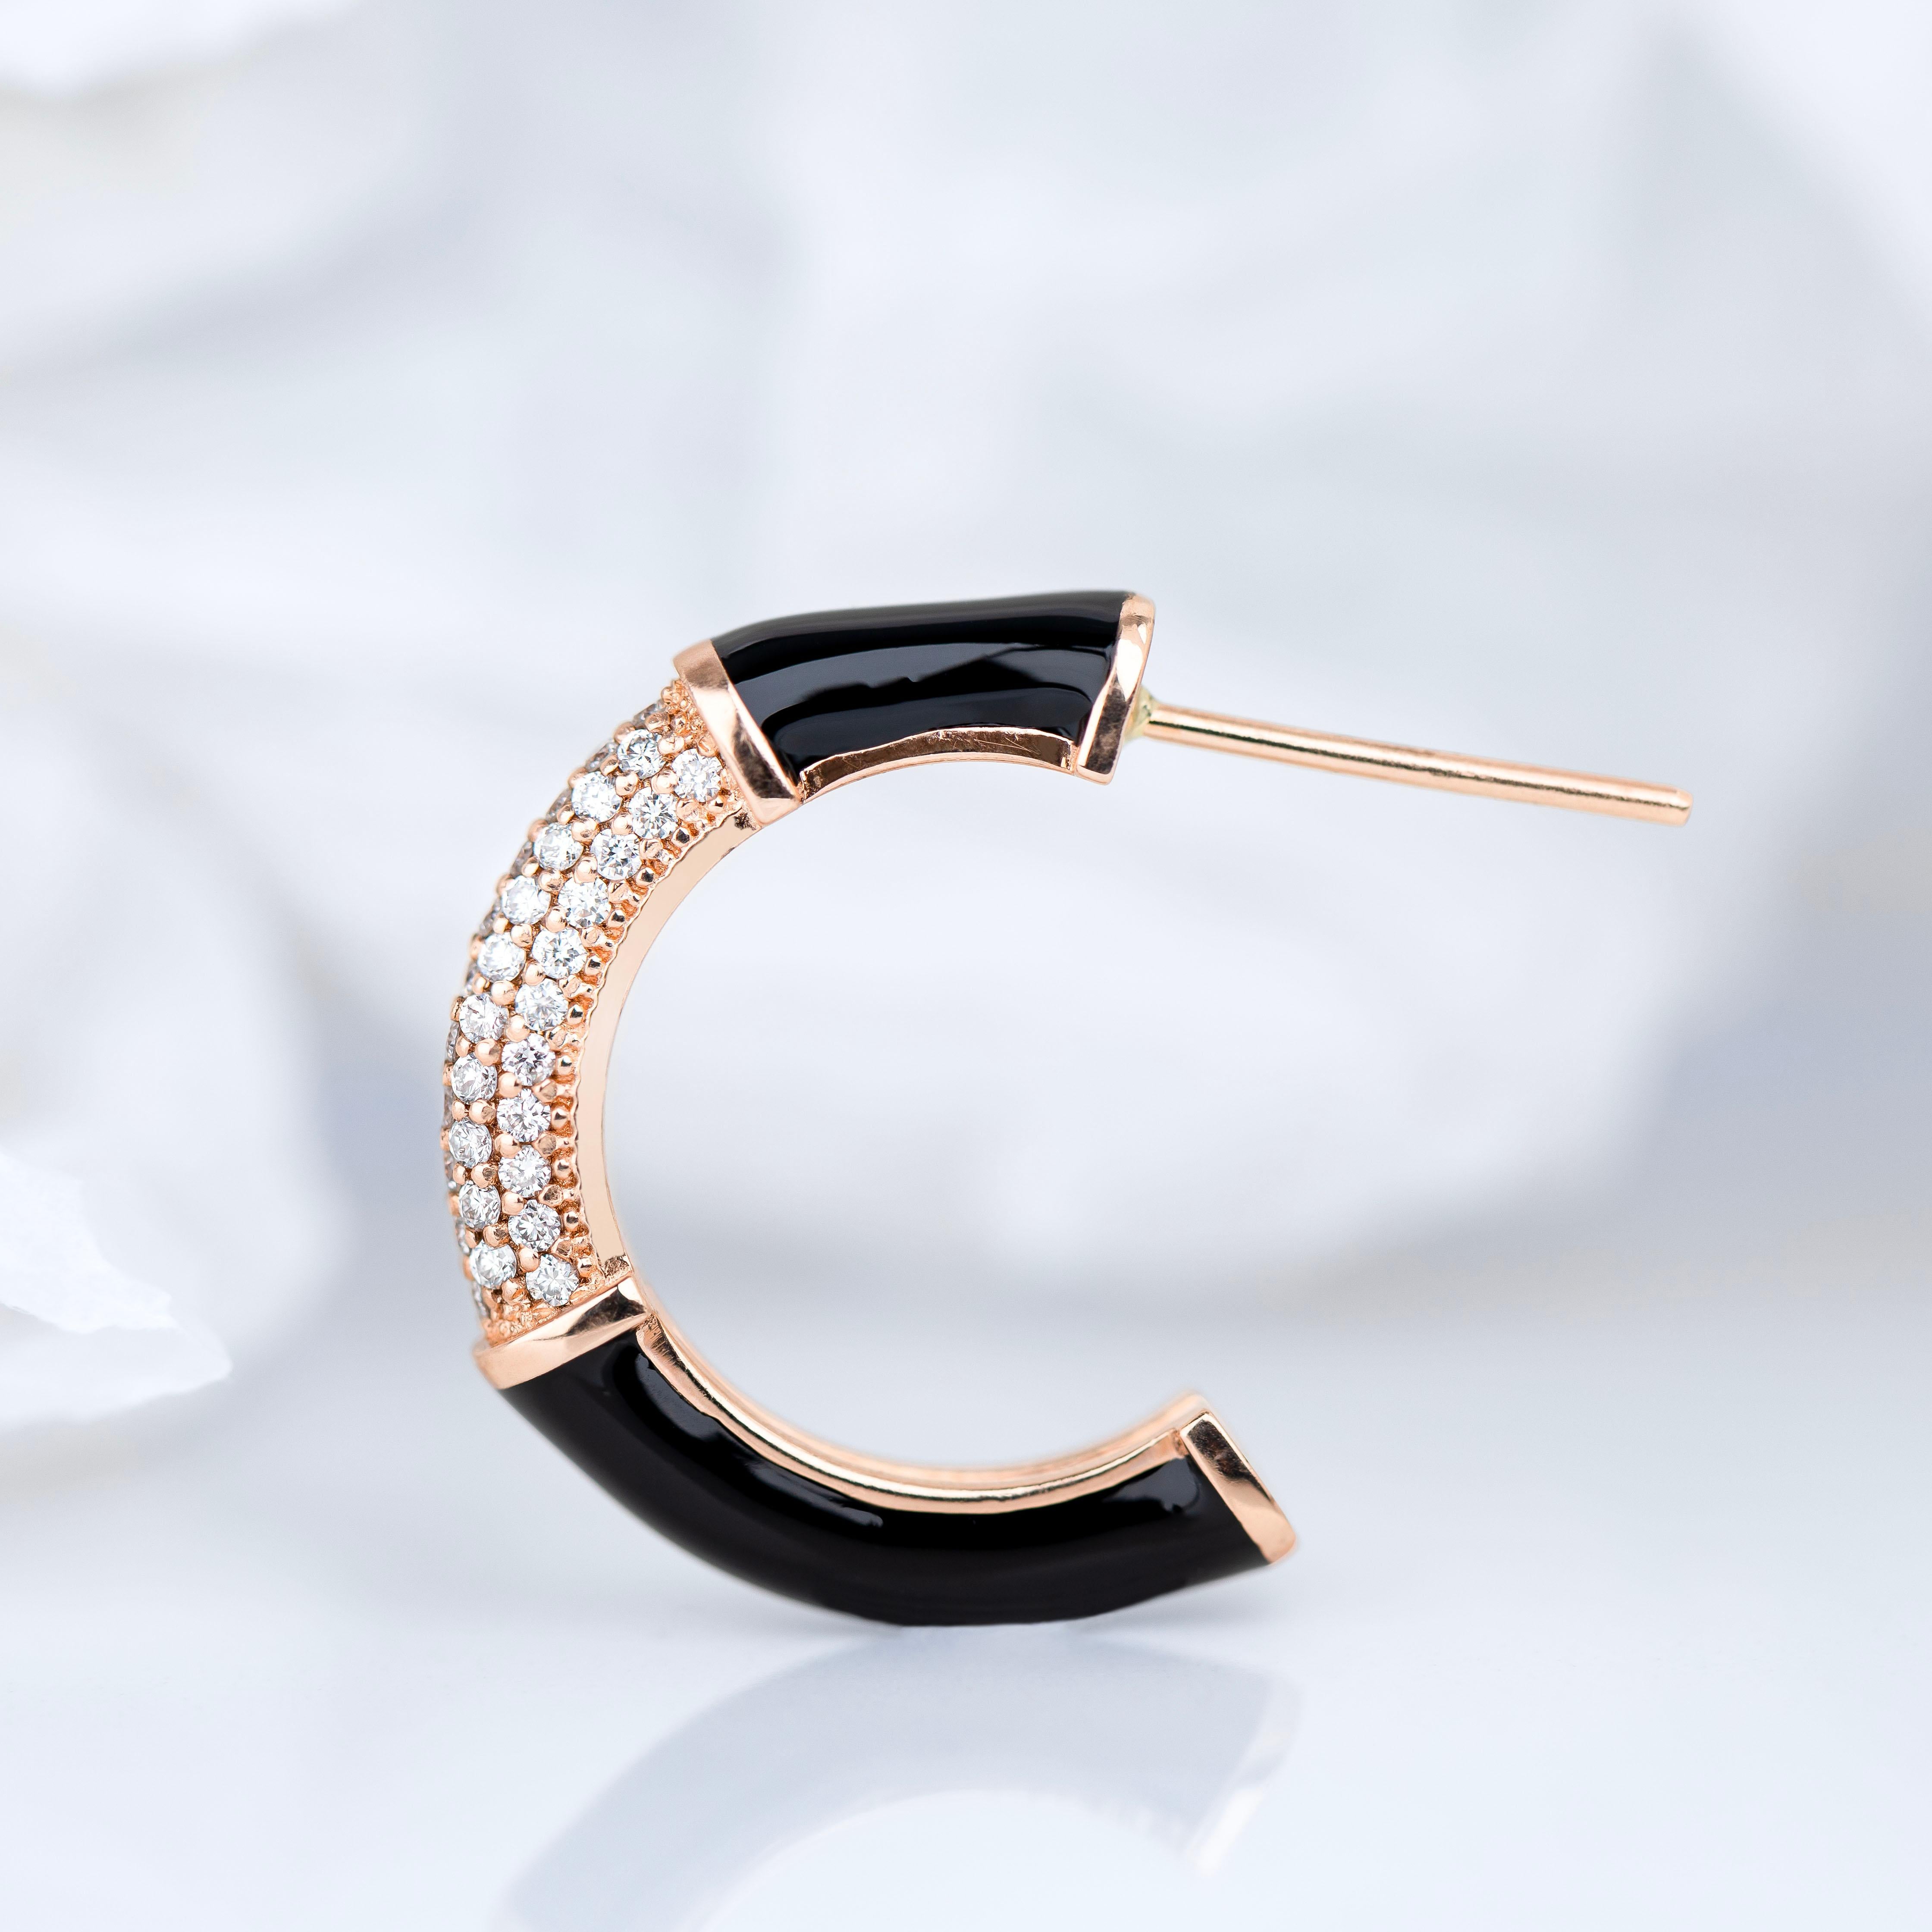 Art Deco StyleGold Earring with Diamond Stone, Bumble Colors Earring

This ring was made with quality materials and excellent handwork. I guarantee the quality assurance of my handwork and materials. It is vital for me that you are totally happy